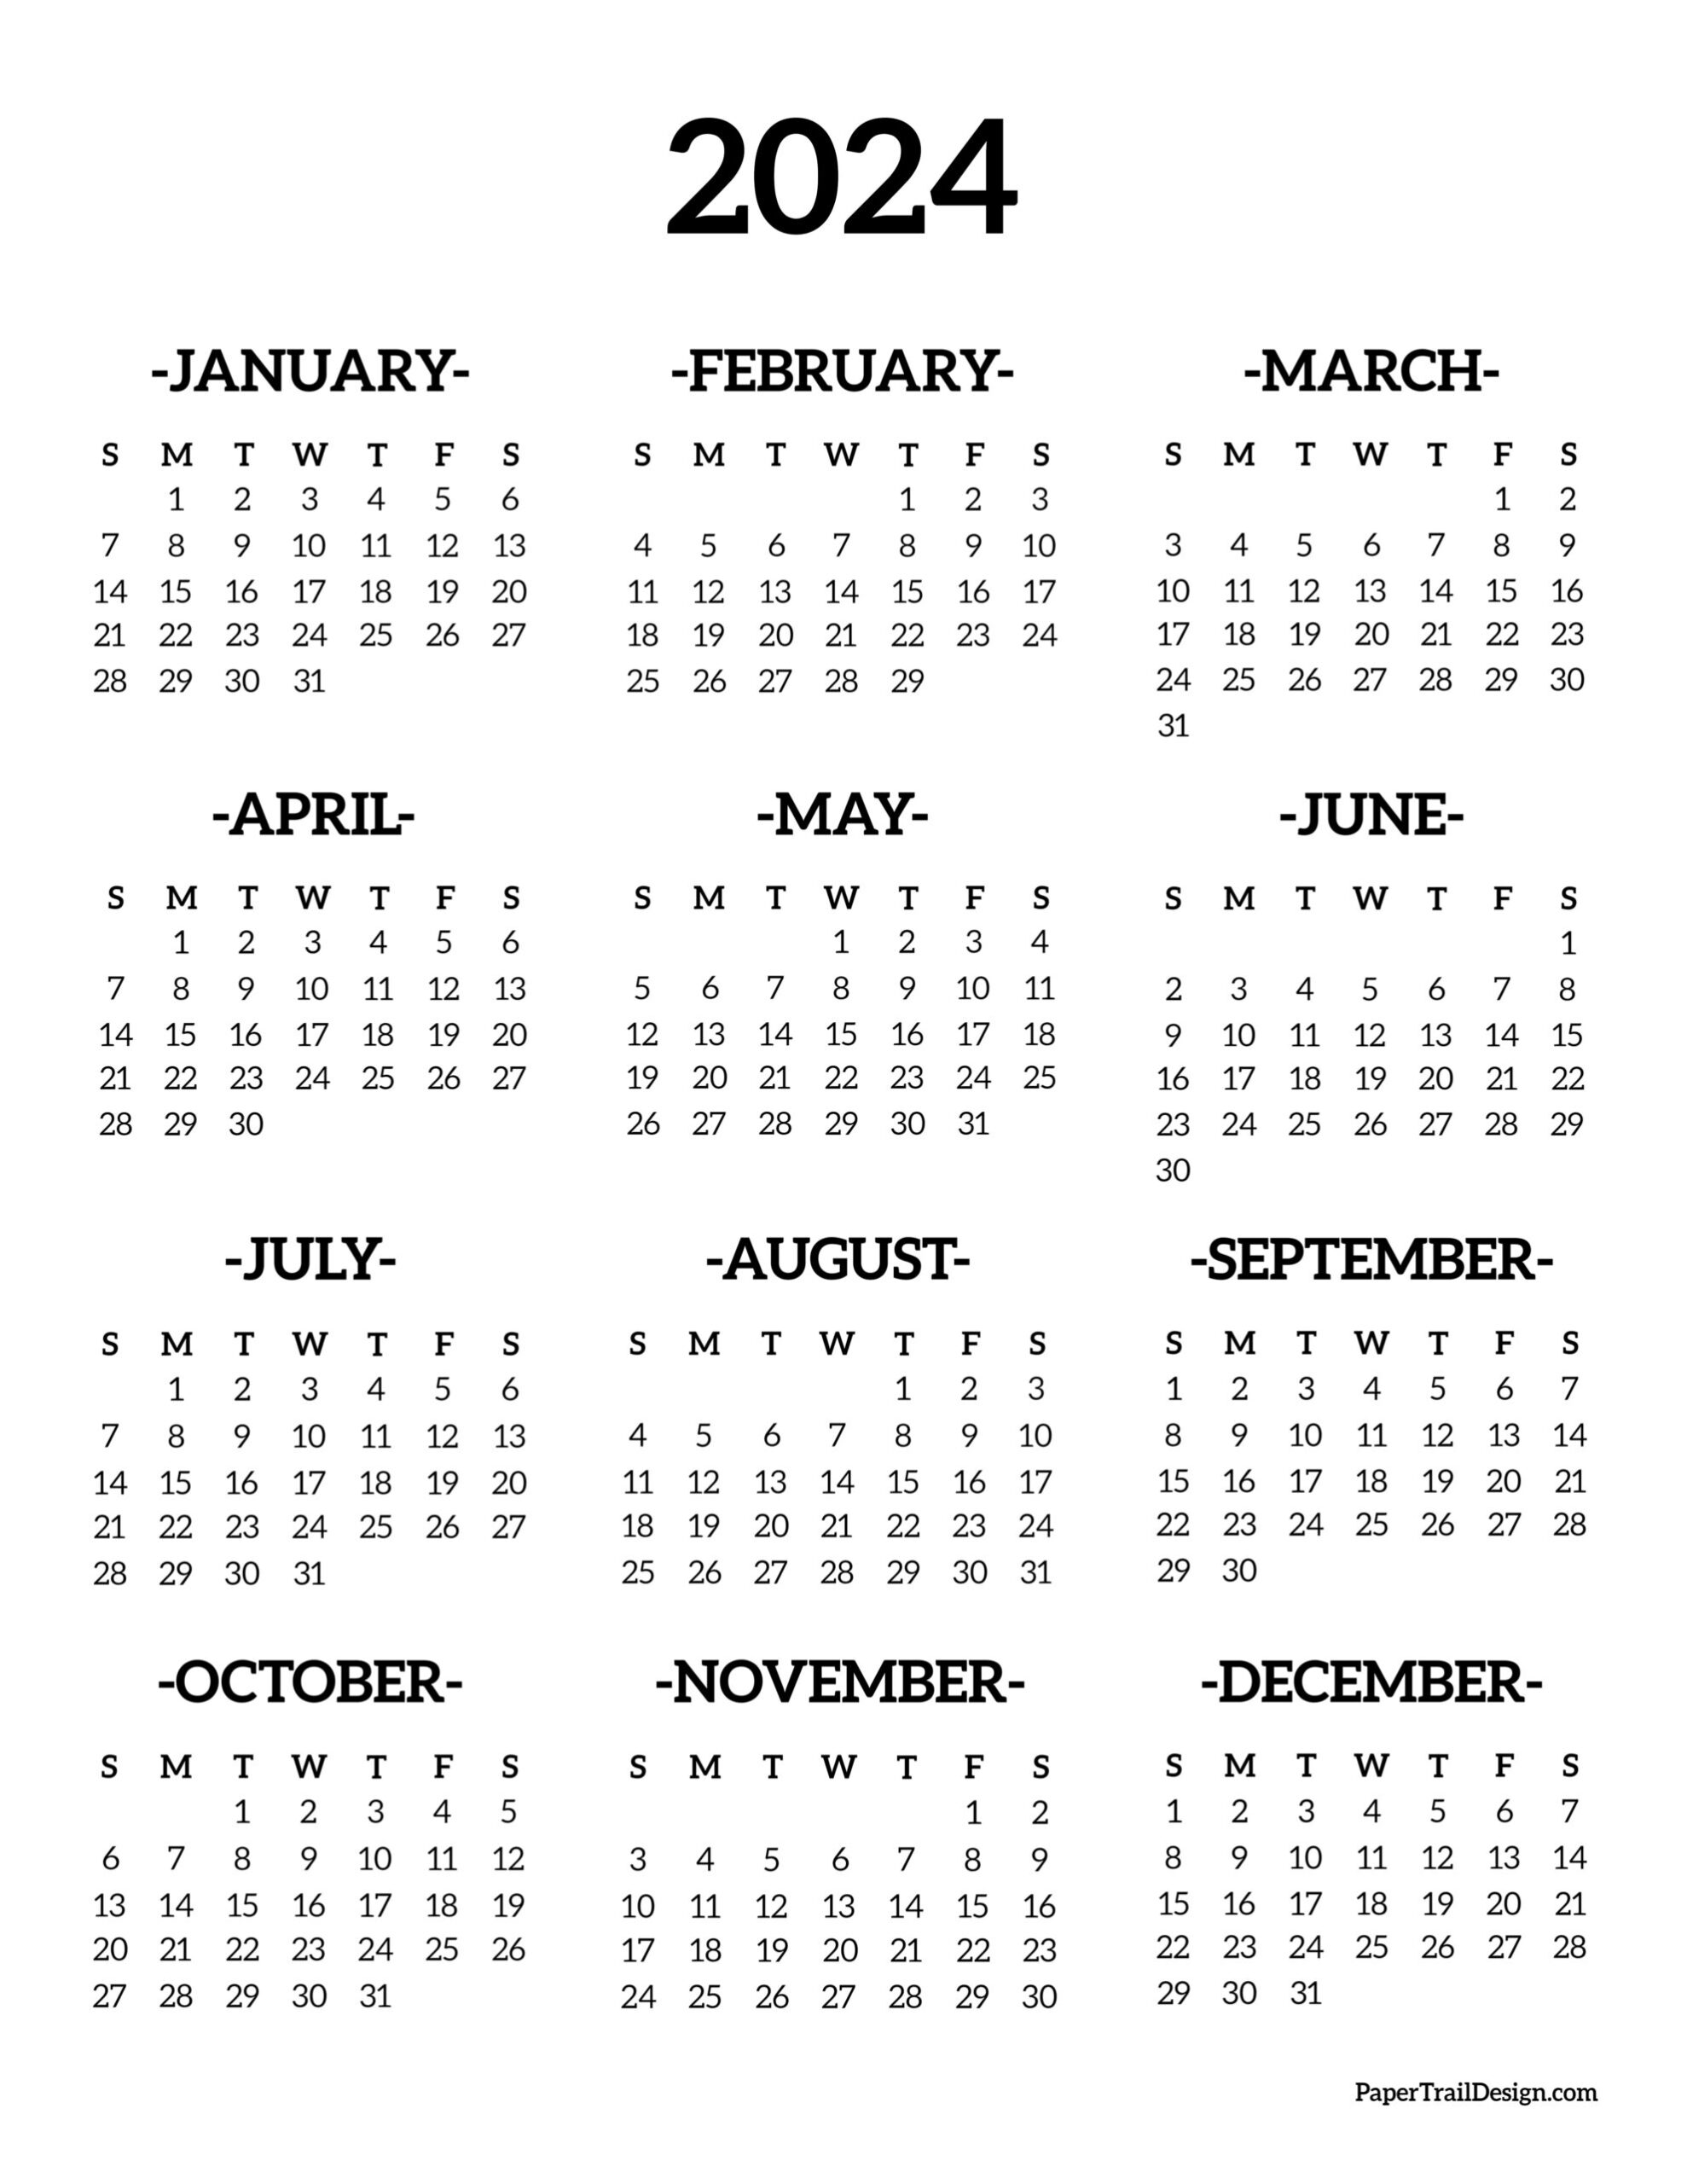 Calendar 2024 Printable One Page - Paper Trail Design for 2024 Printable Yearly Calendar One Page